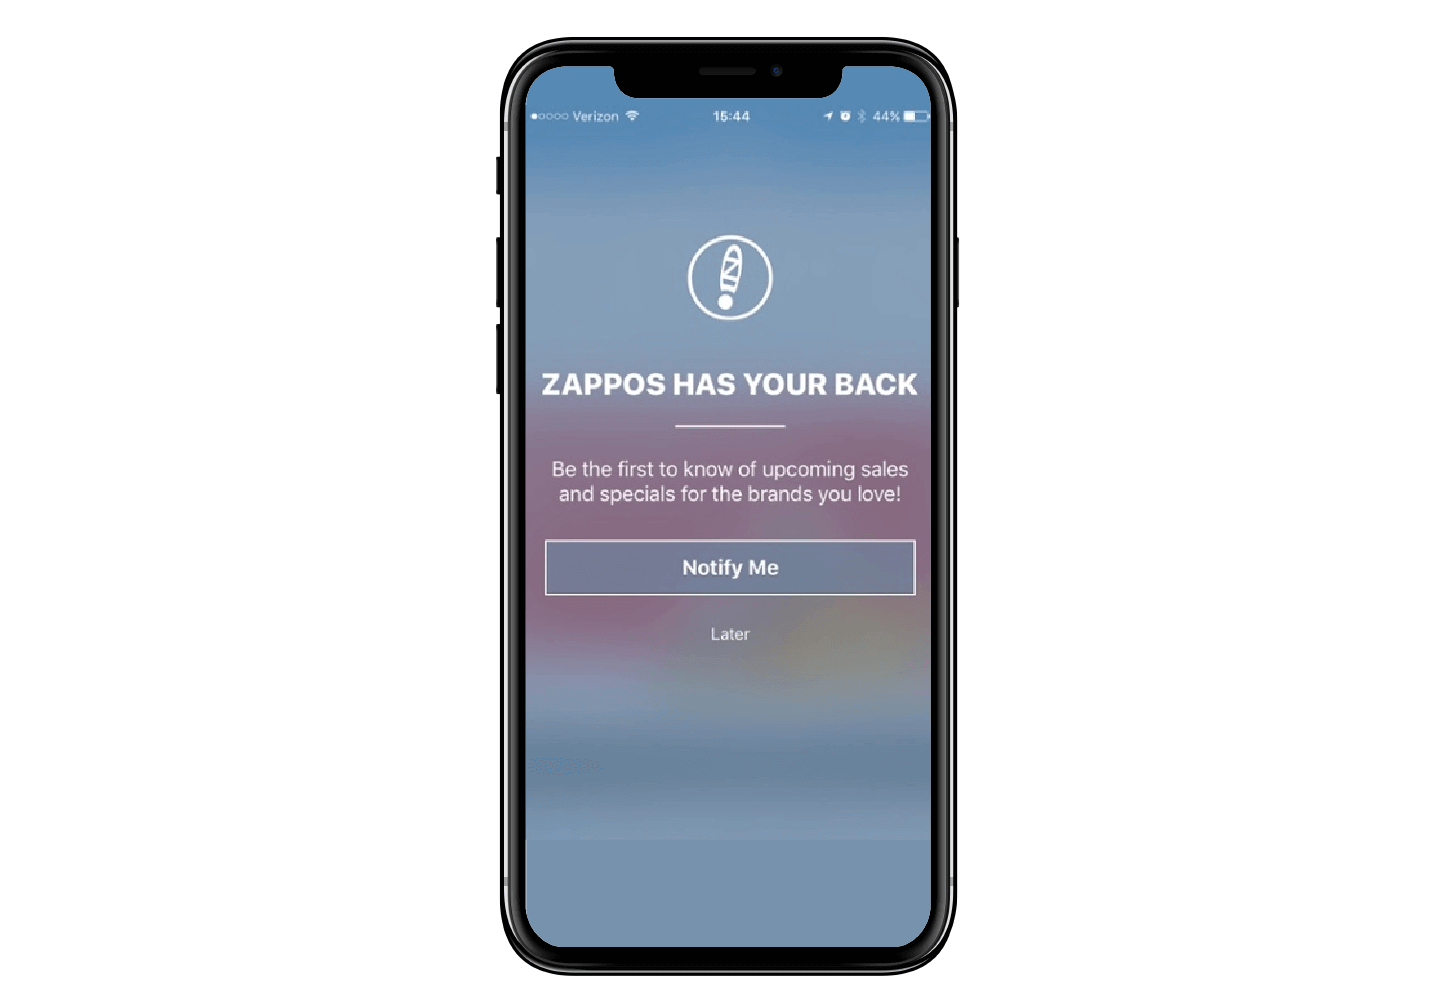 Zappos - Opt-in for Push Notifications